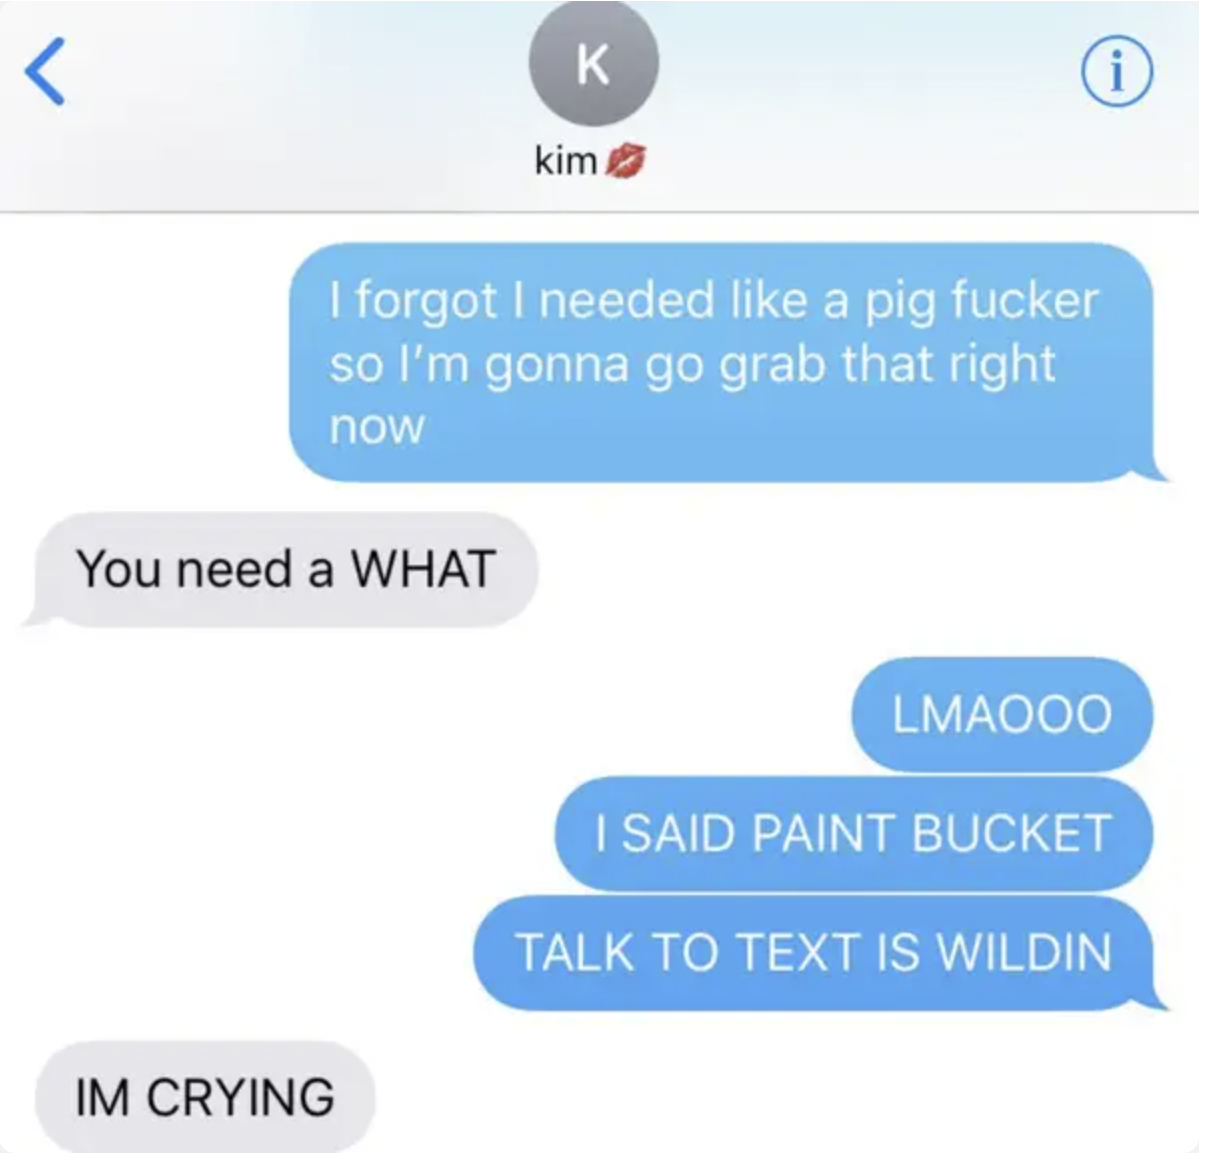 voice to text mistaking paint bucket for pig fucker